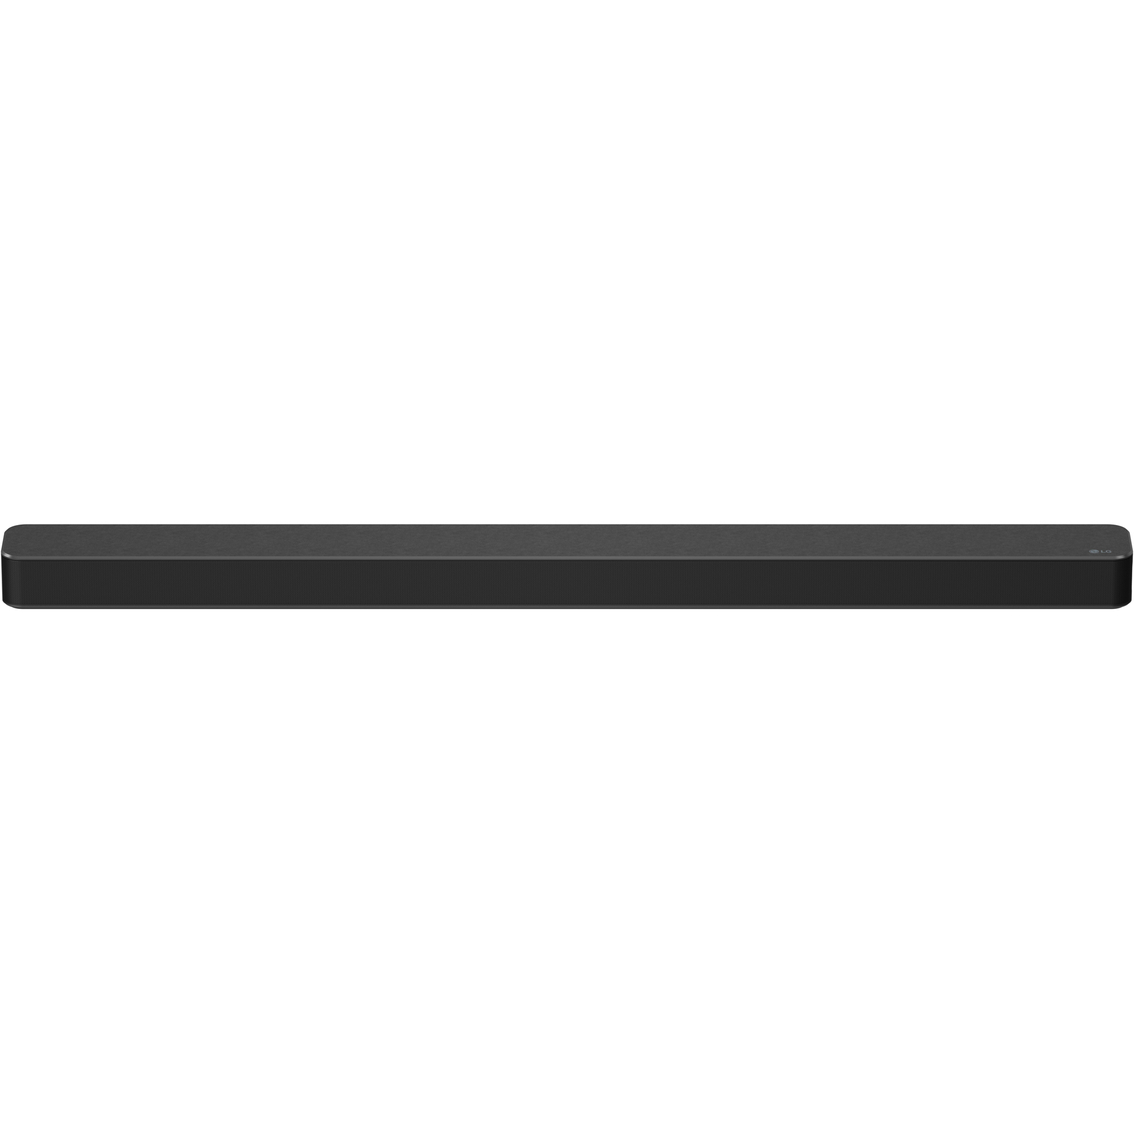 LG SN6Y 3.1 Channel 420 Watt High Res Audio Sound Bar with DTS Virtual:X - Image 2 of 10